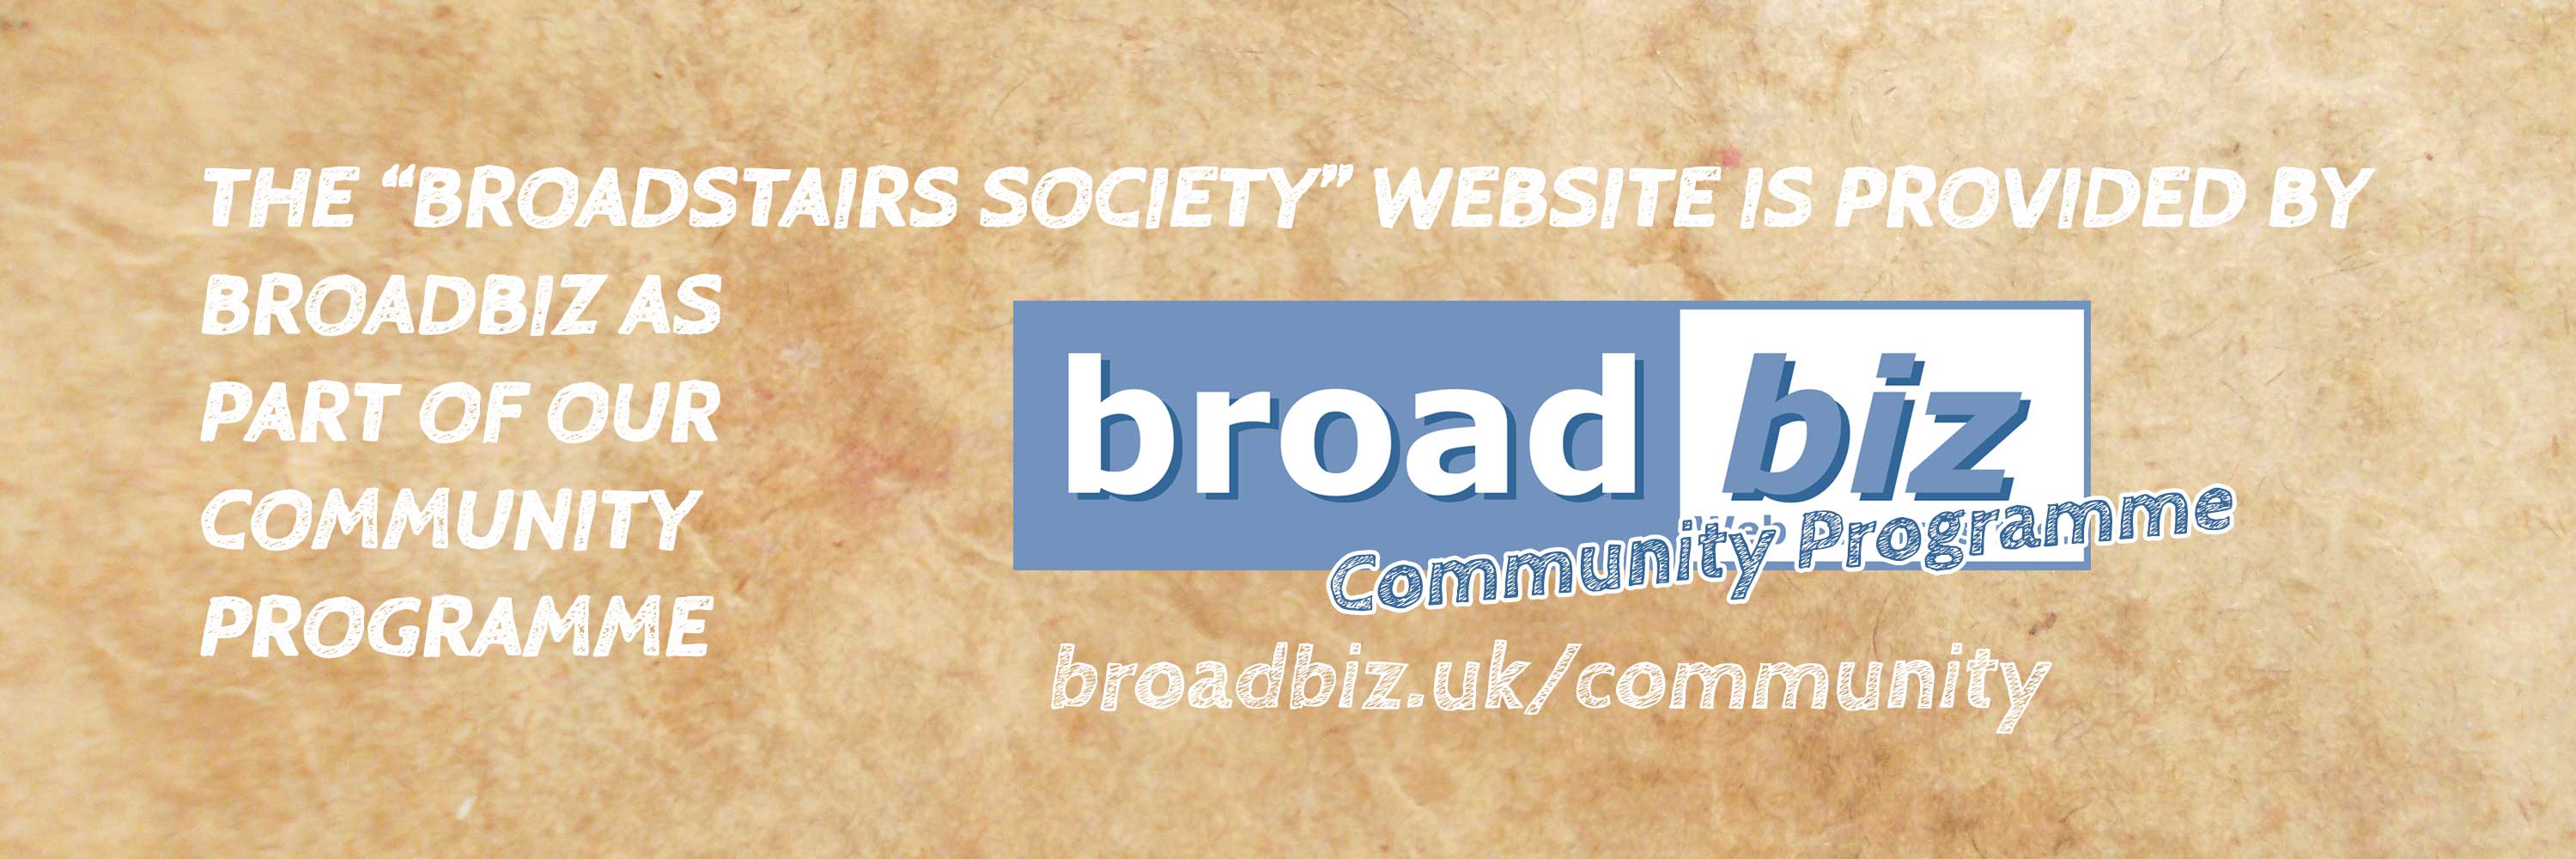 The The Broadstairs Society website is provided by Broadbiz as part of our Community Programme